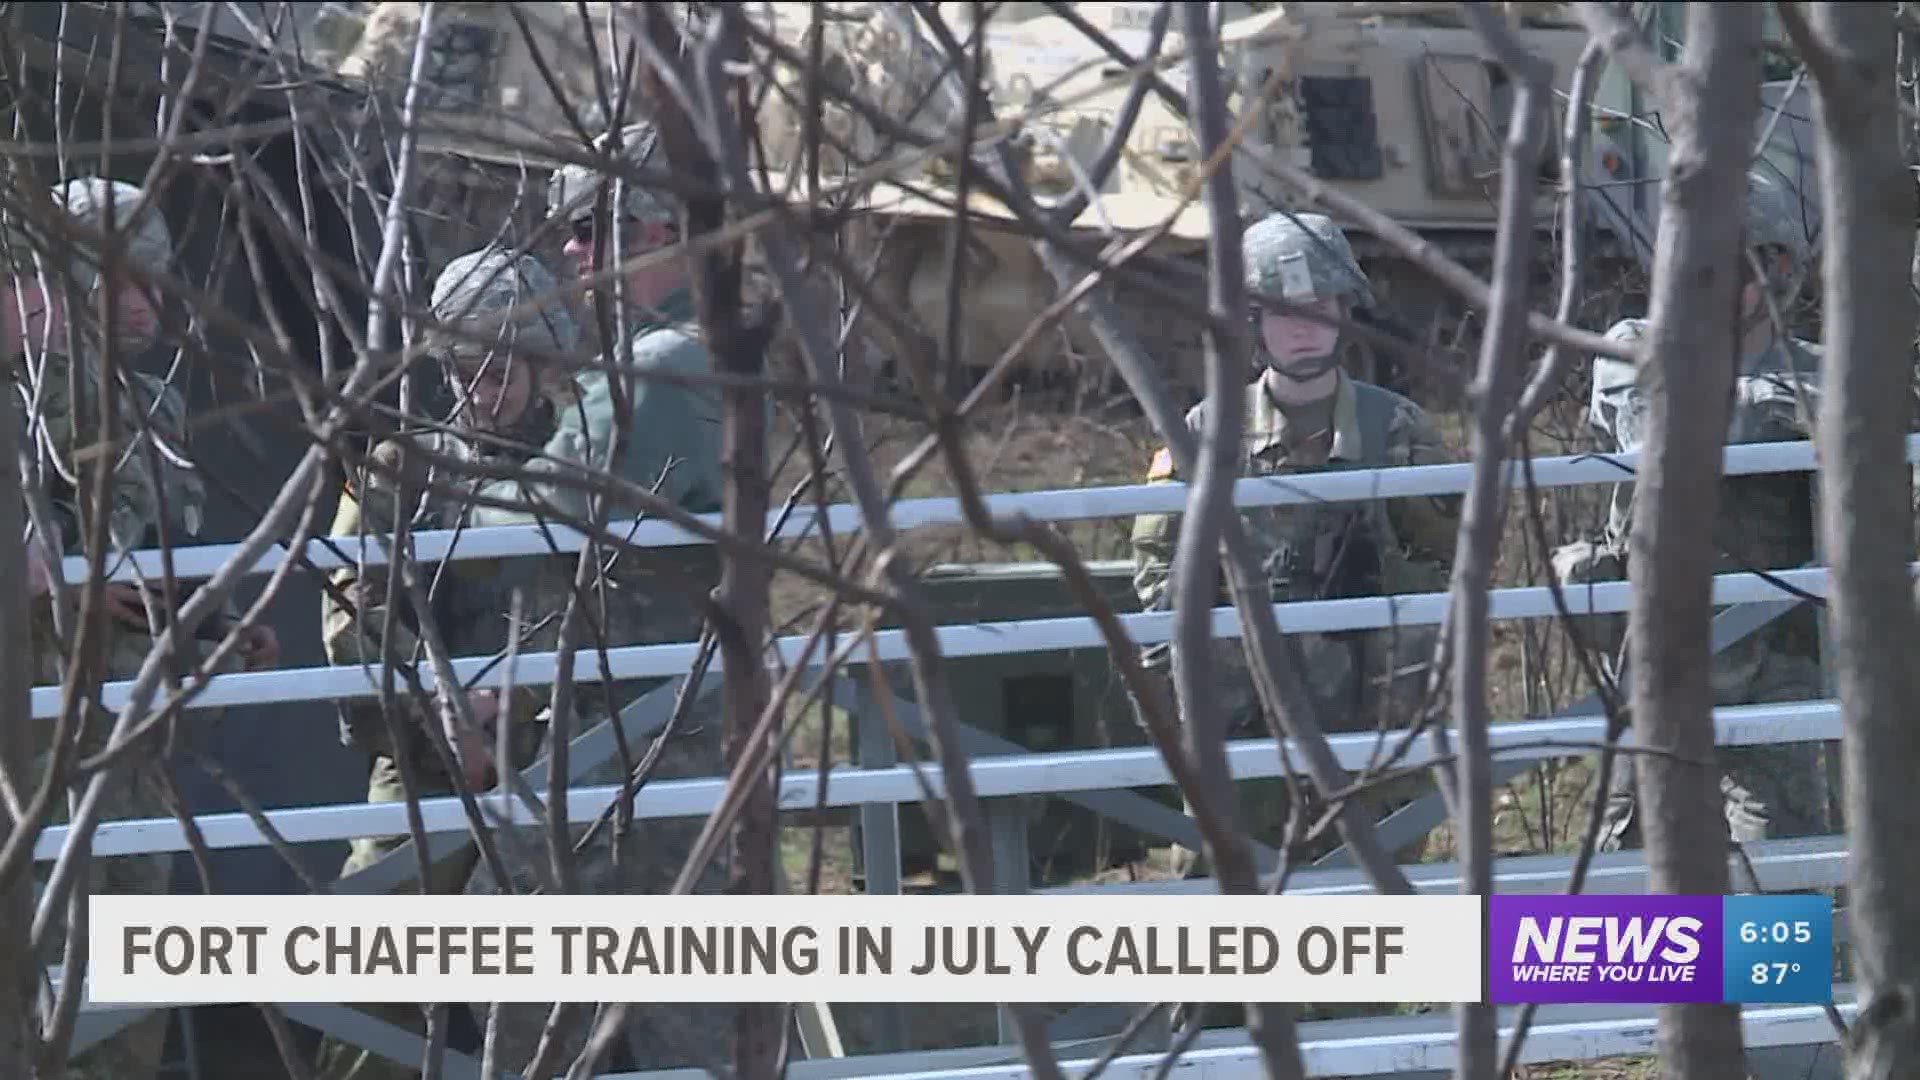 Upcoming National Guard training at Fort Chaffee canceled due to coronavirus